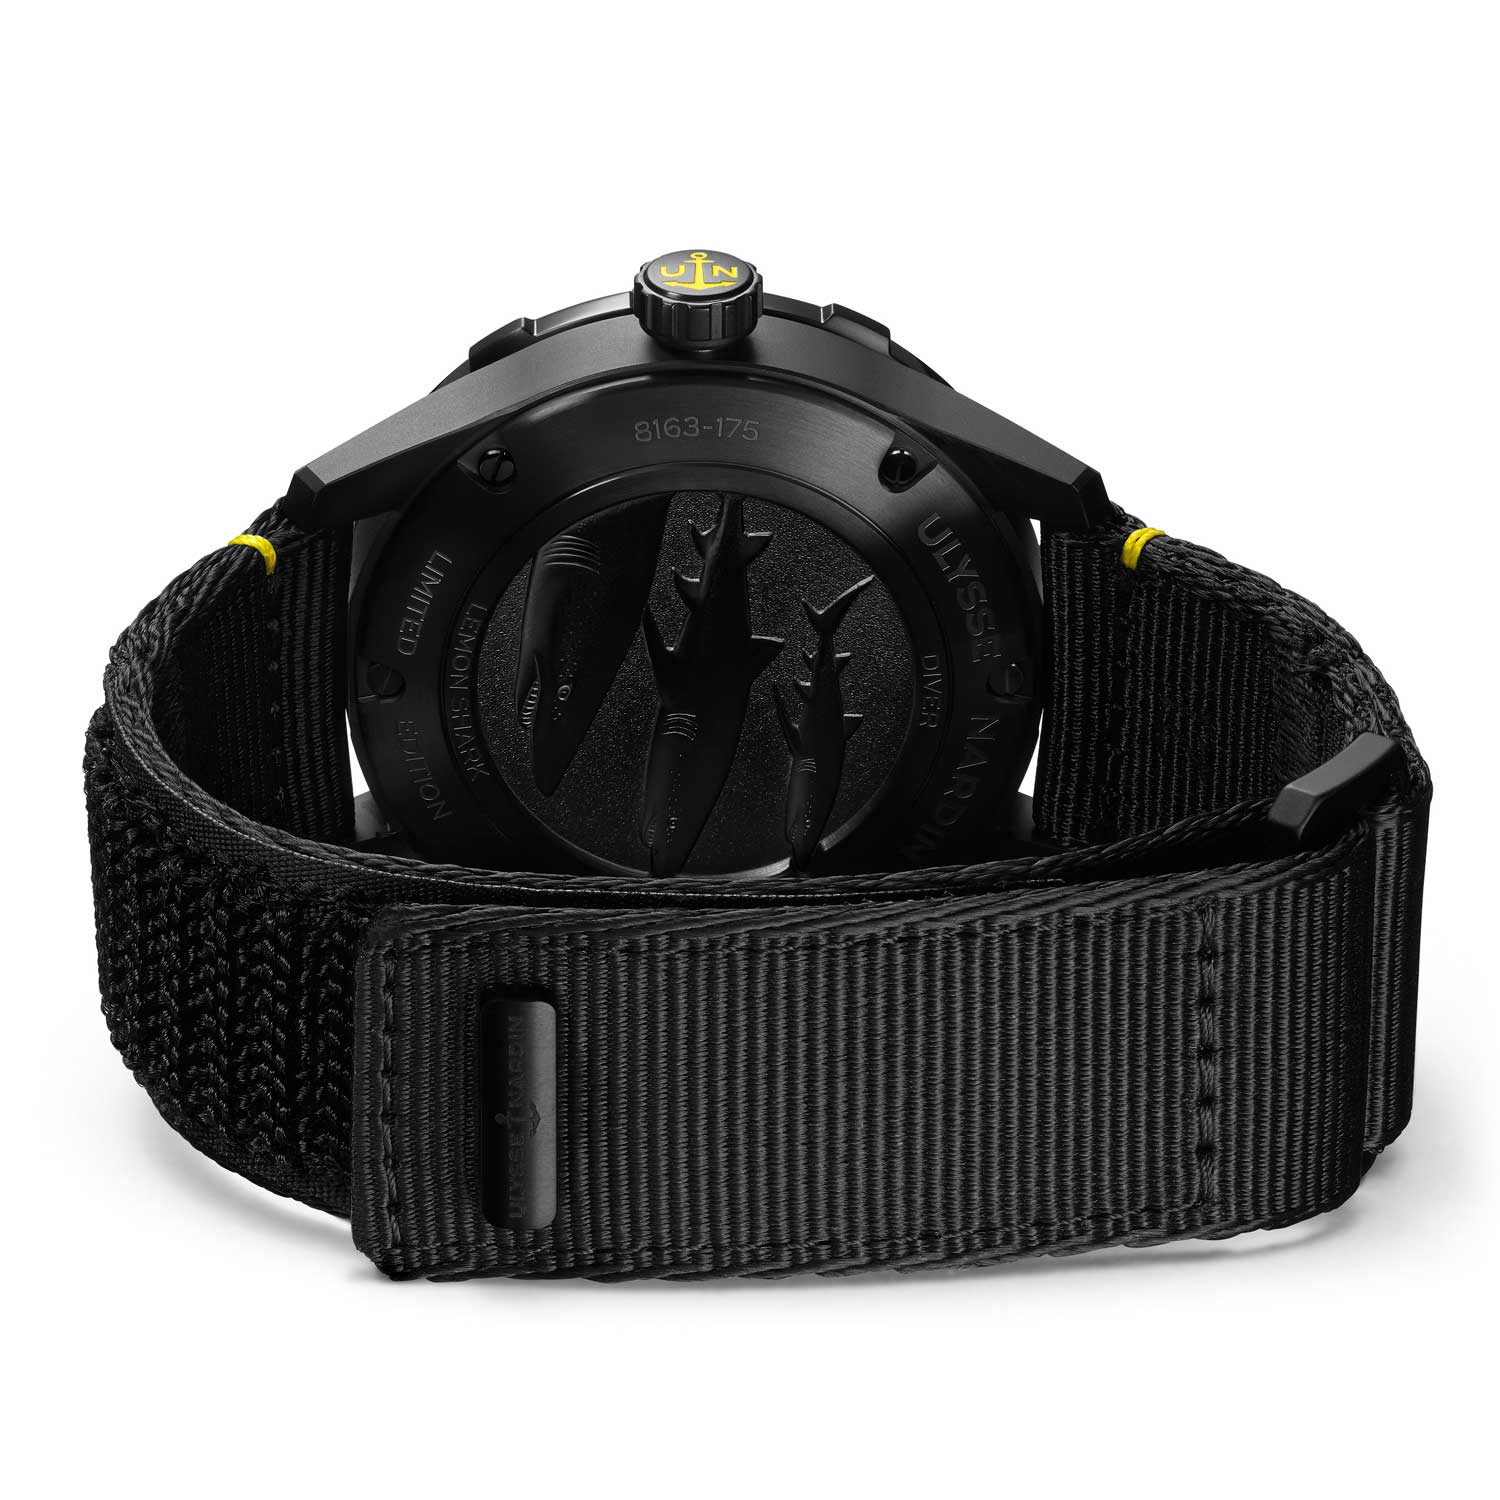 The watch comes on a black R-STRAP made entirely from recycled fishing nets.